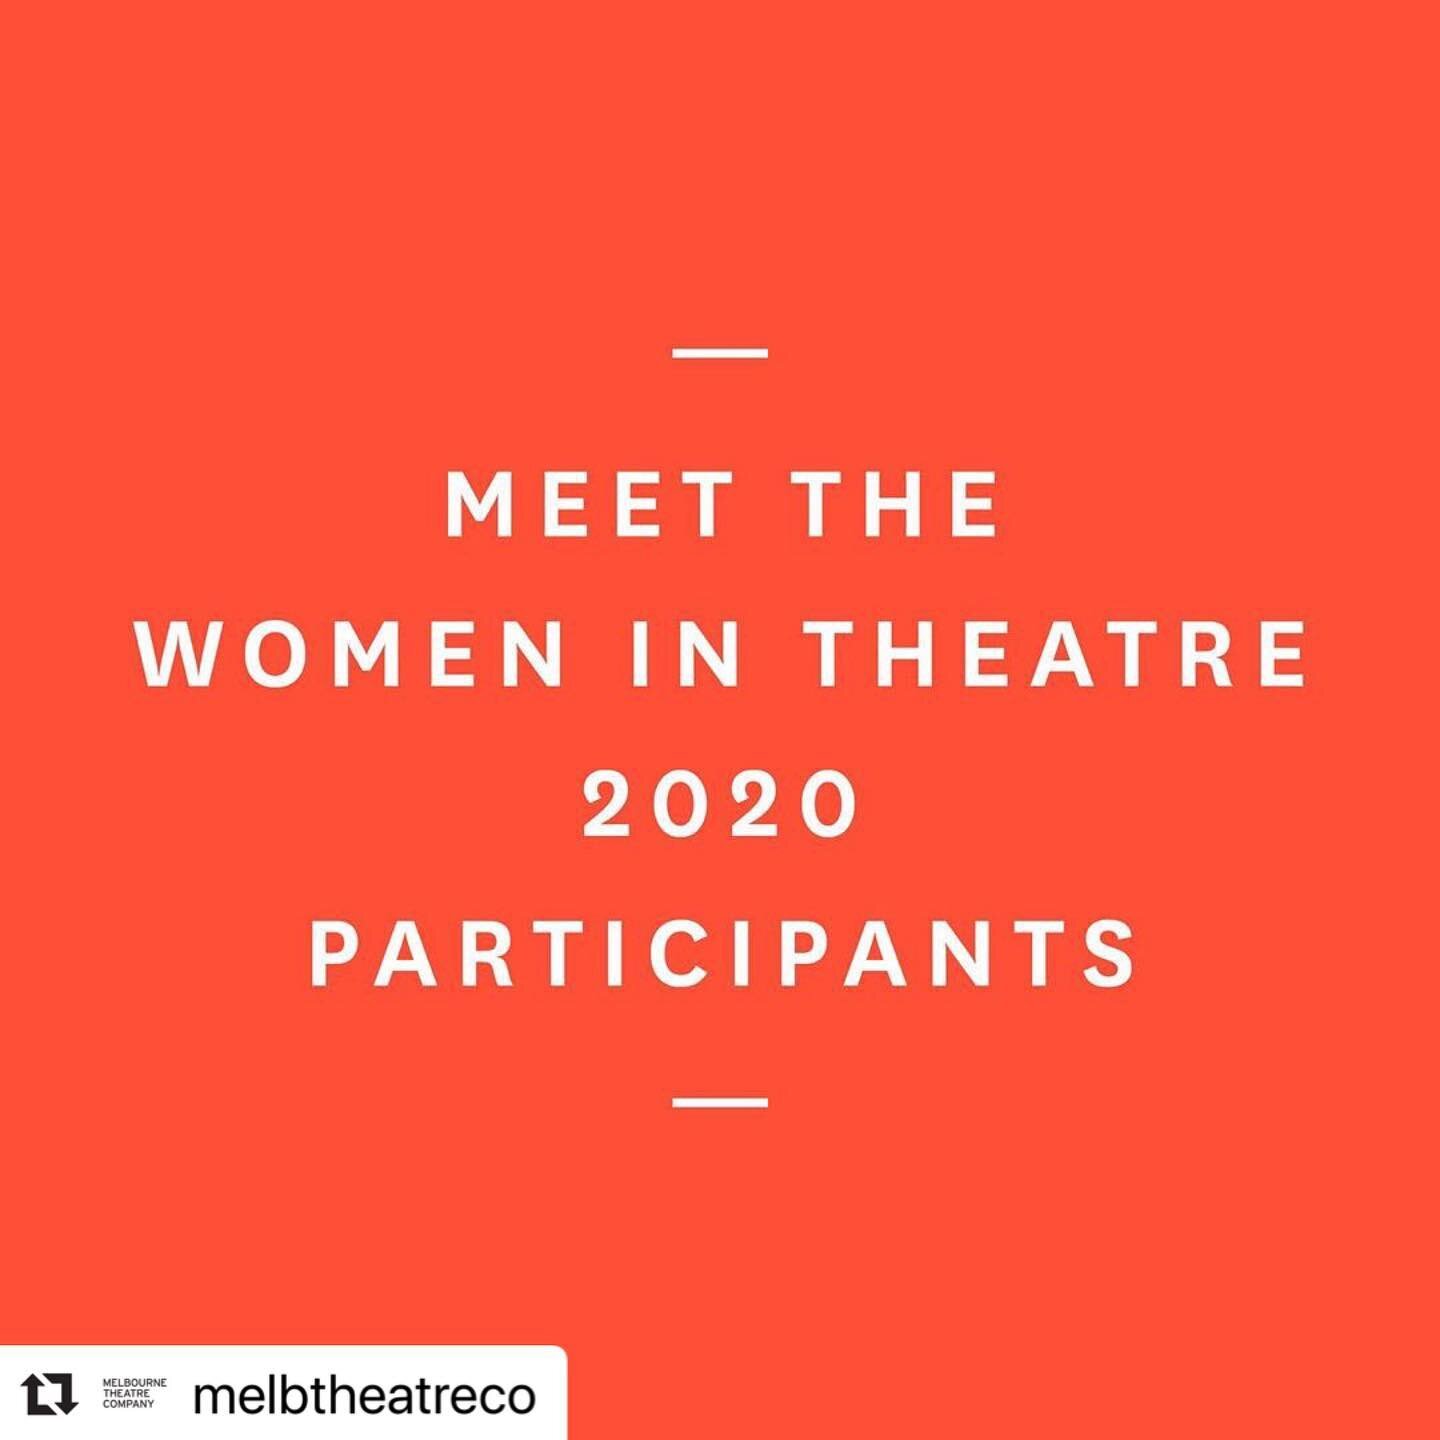 Thrilled to be in great company as part of @melbtheatreco Women in Theatre Program 2020!! 💃🏻 https://www.mtc.com.au/discover-more/backstage/women-in-theatre-2020/

#Repost @melbtheatreco with @make_repost
・・・
We are delighted to welcome 12 new part